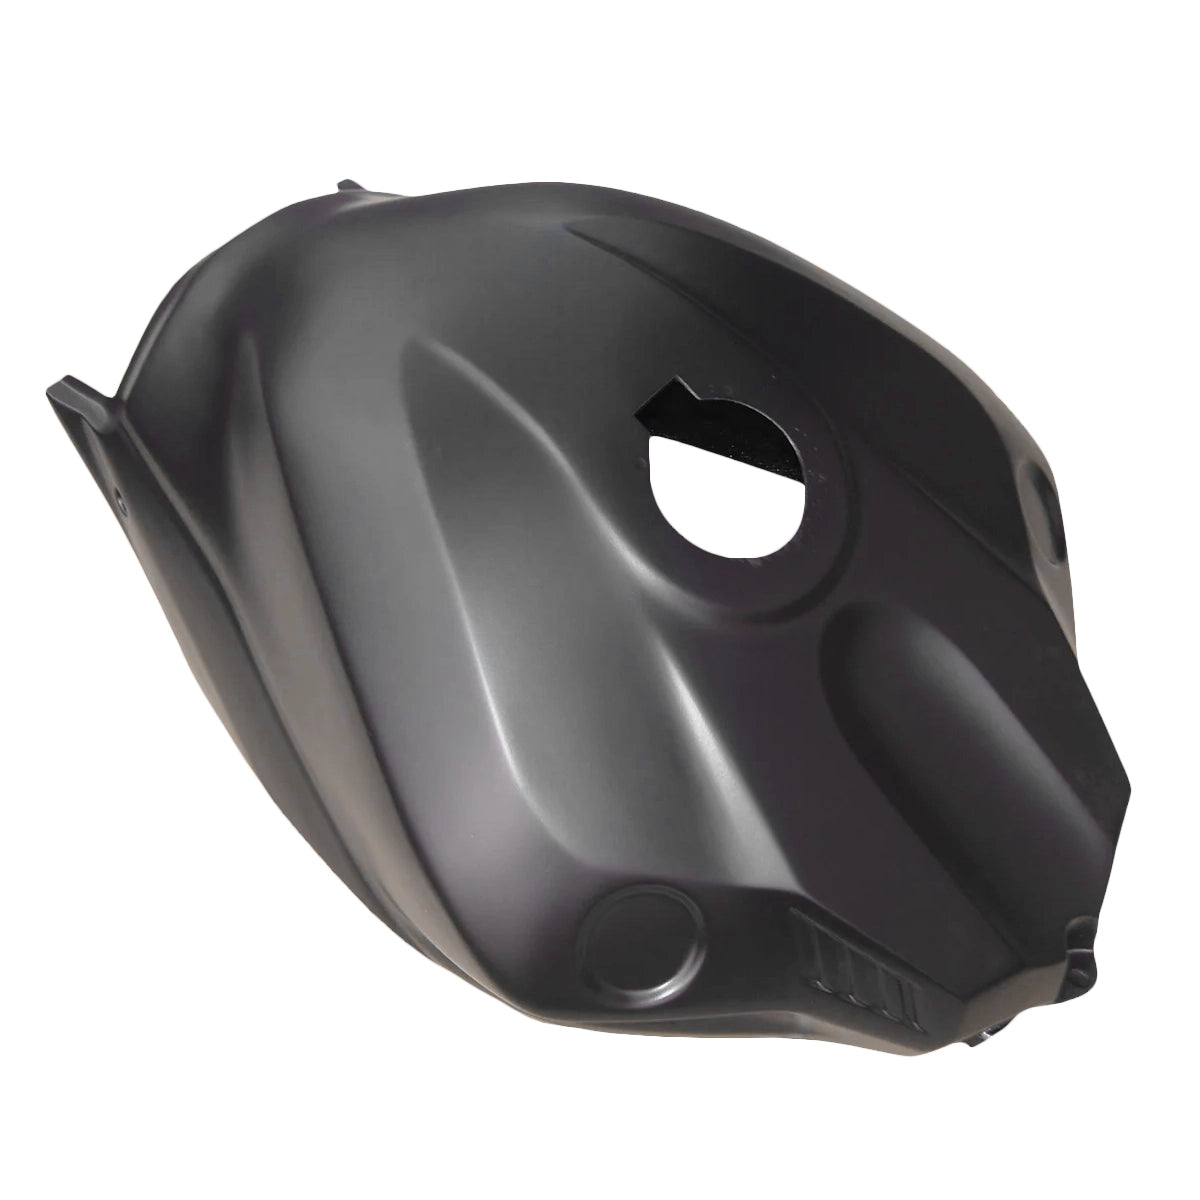 Tank cover for YAMAHA R1 2015 - 2019